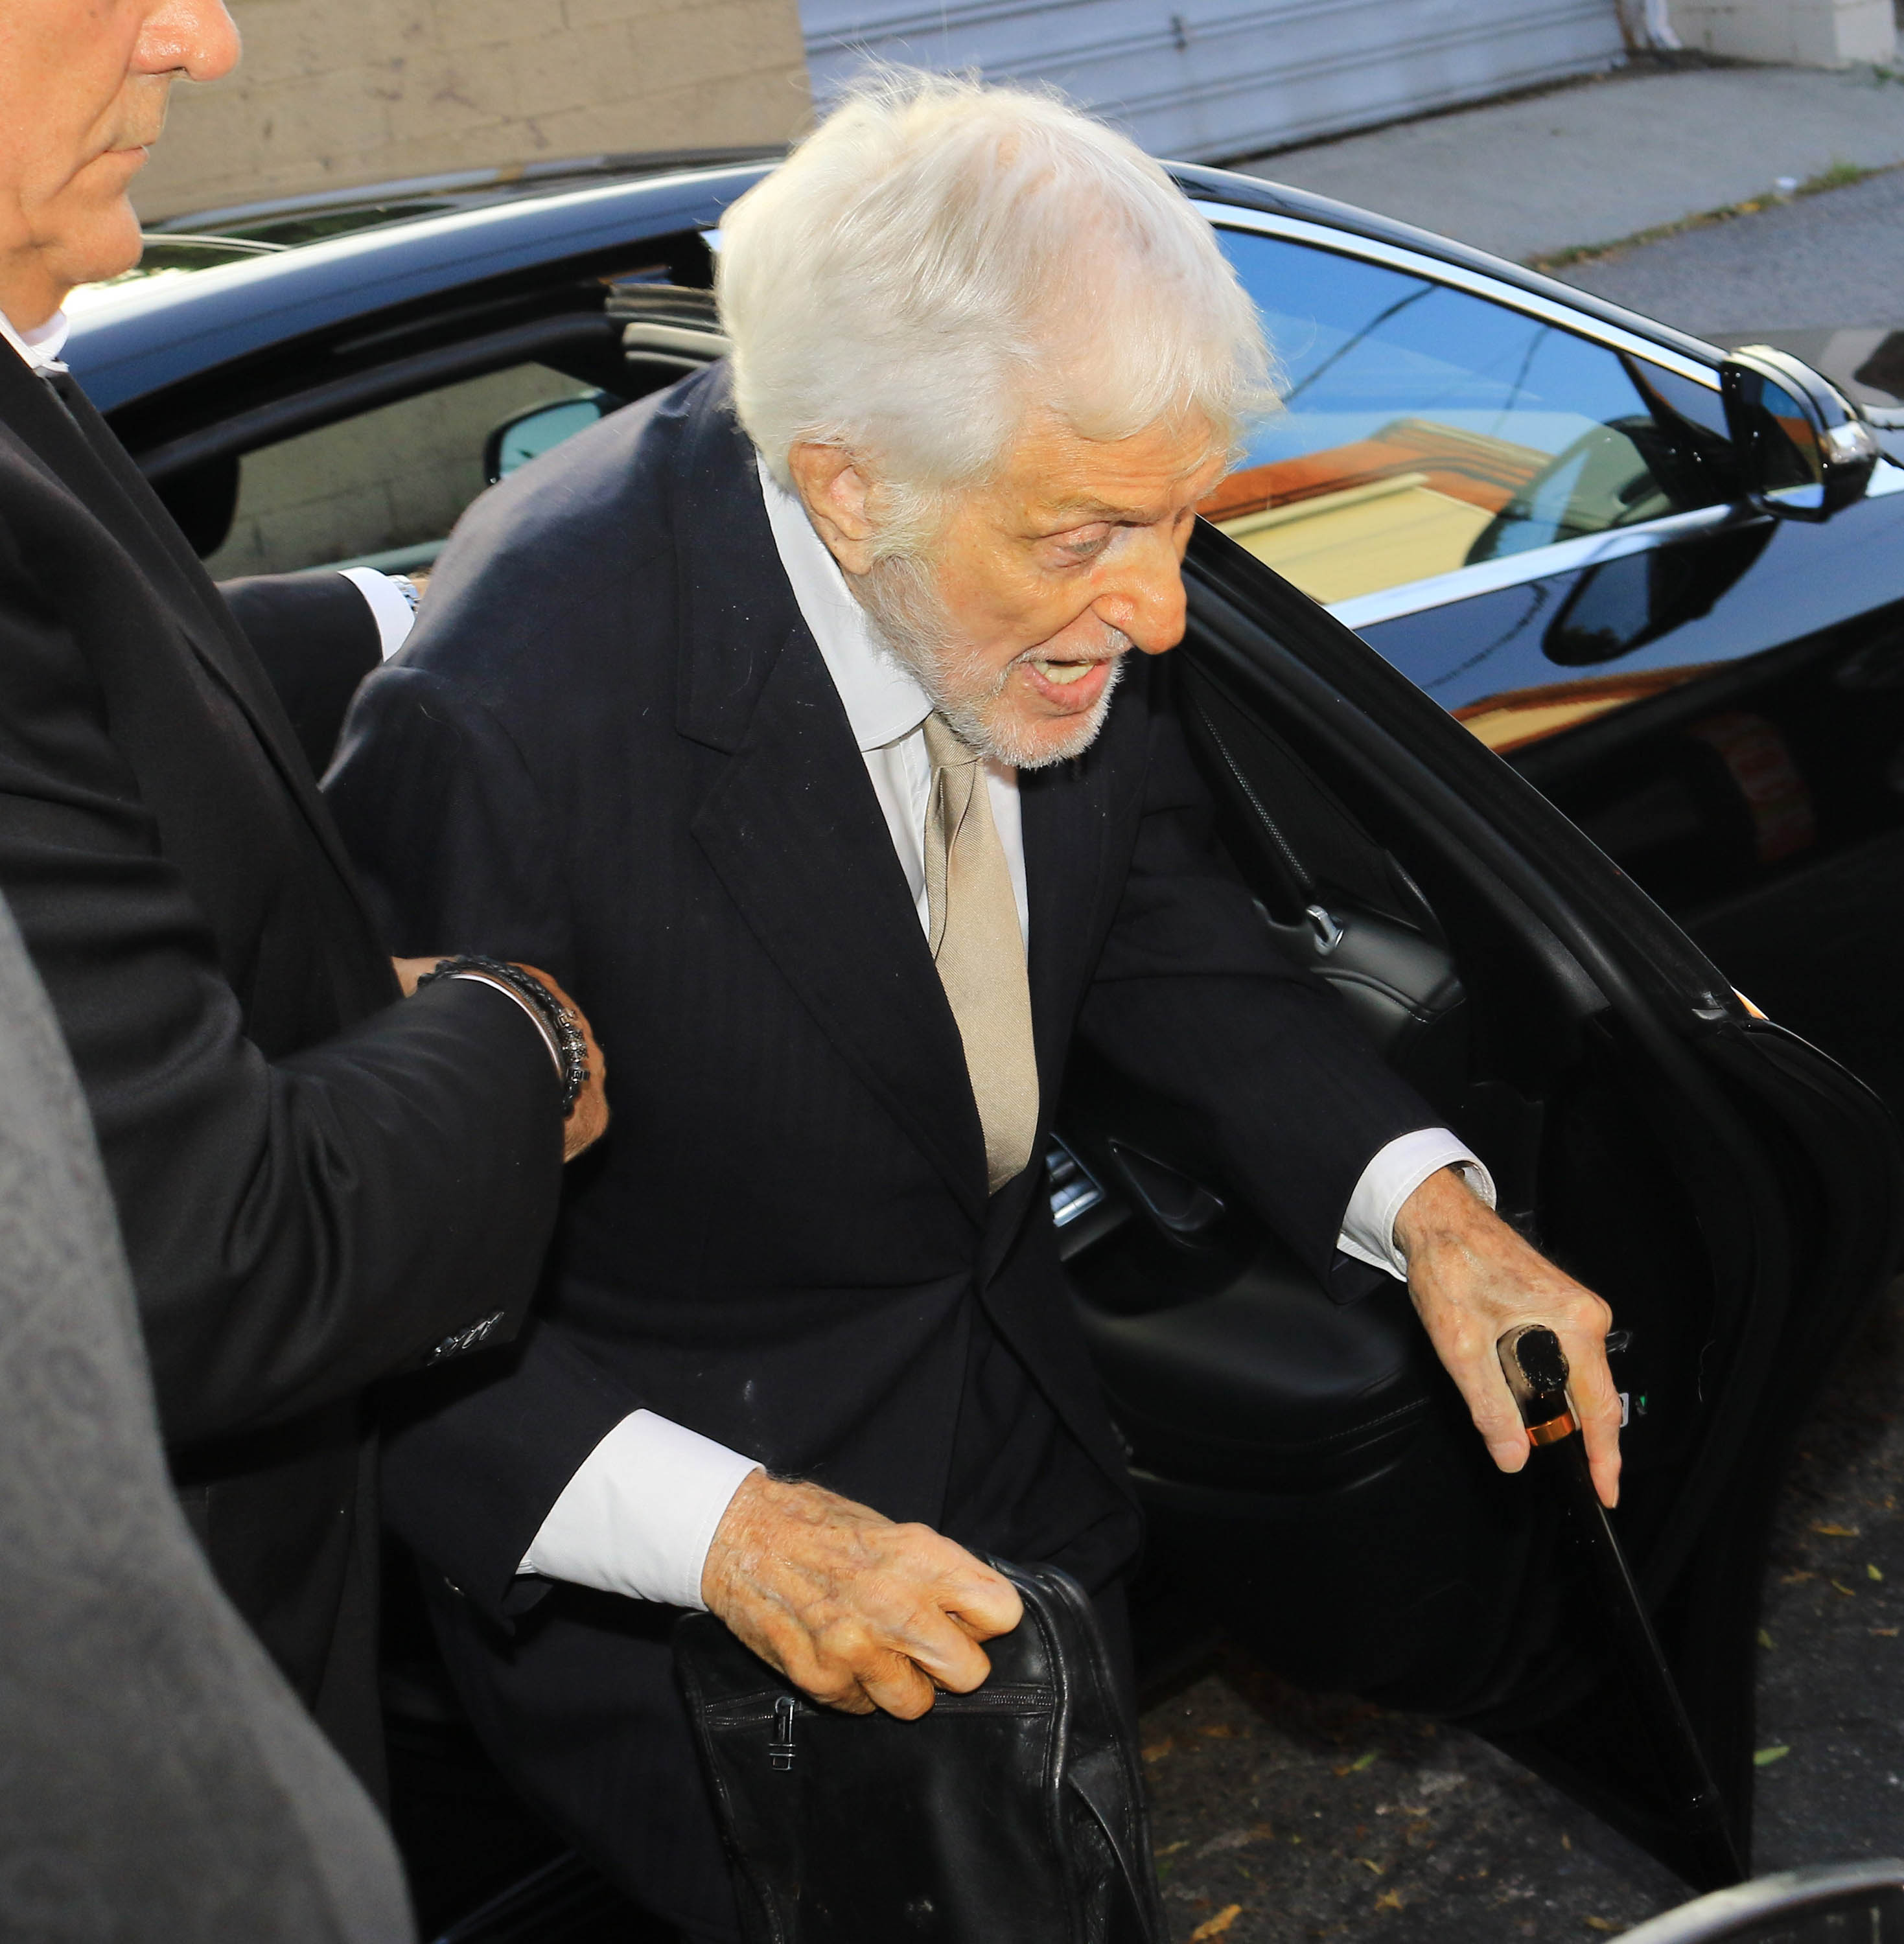 Dick Van Dyke Crashes Into Gate In His Car Paramedics Treated Him At The Scene News And Gossip